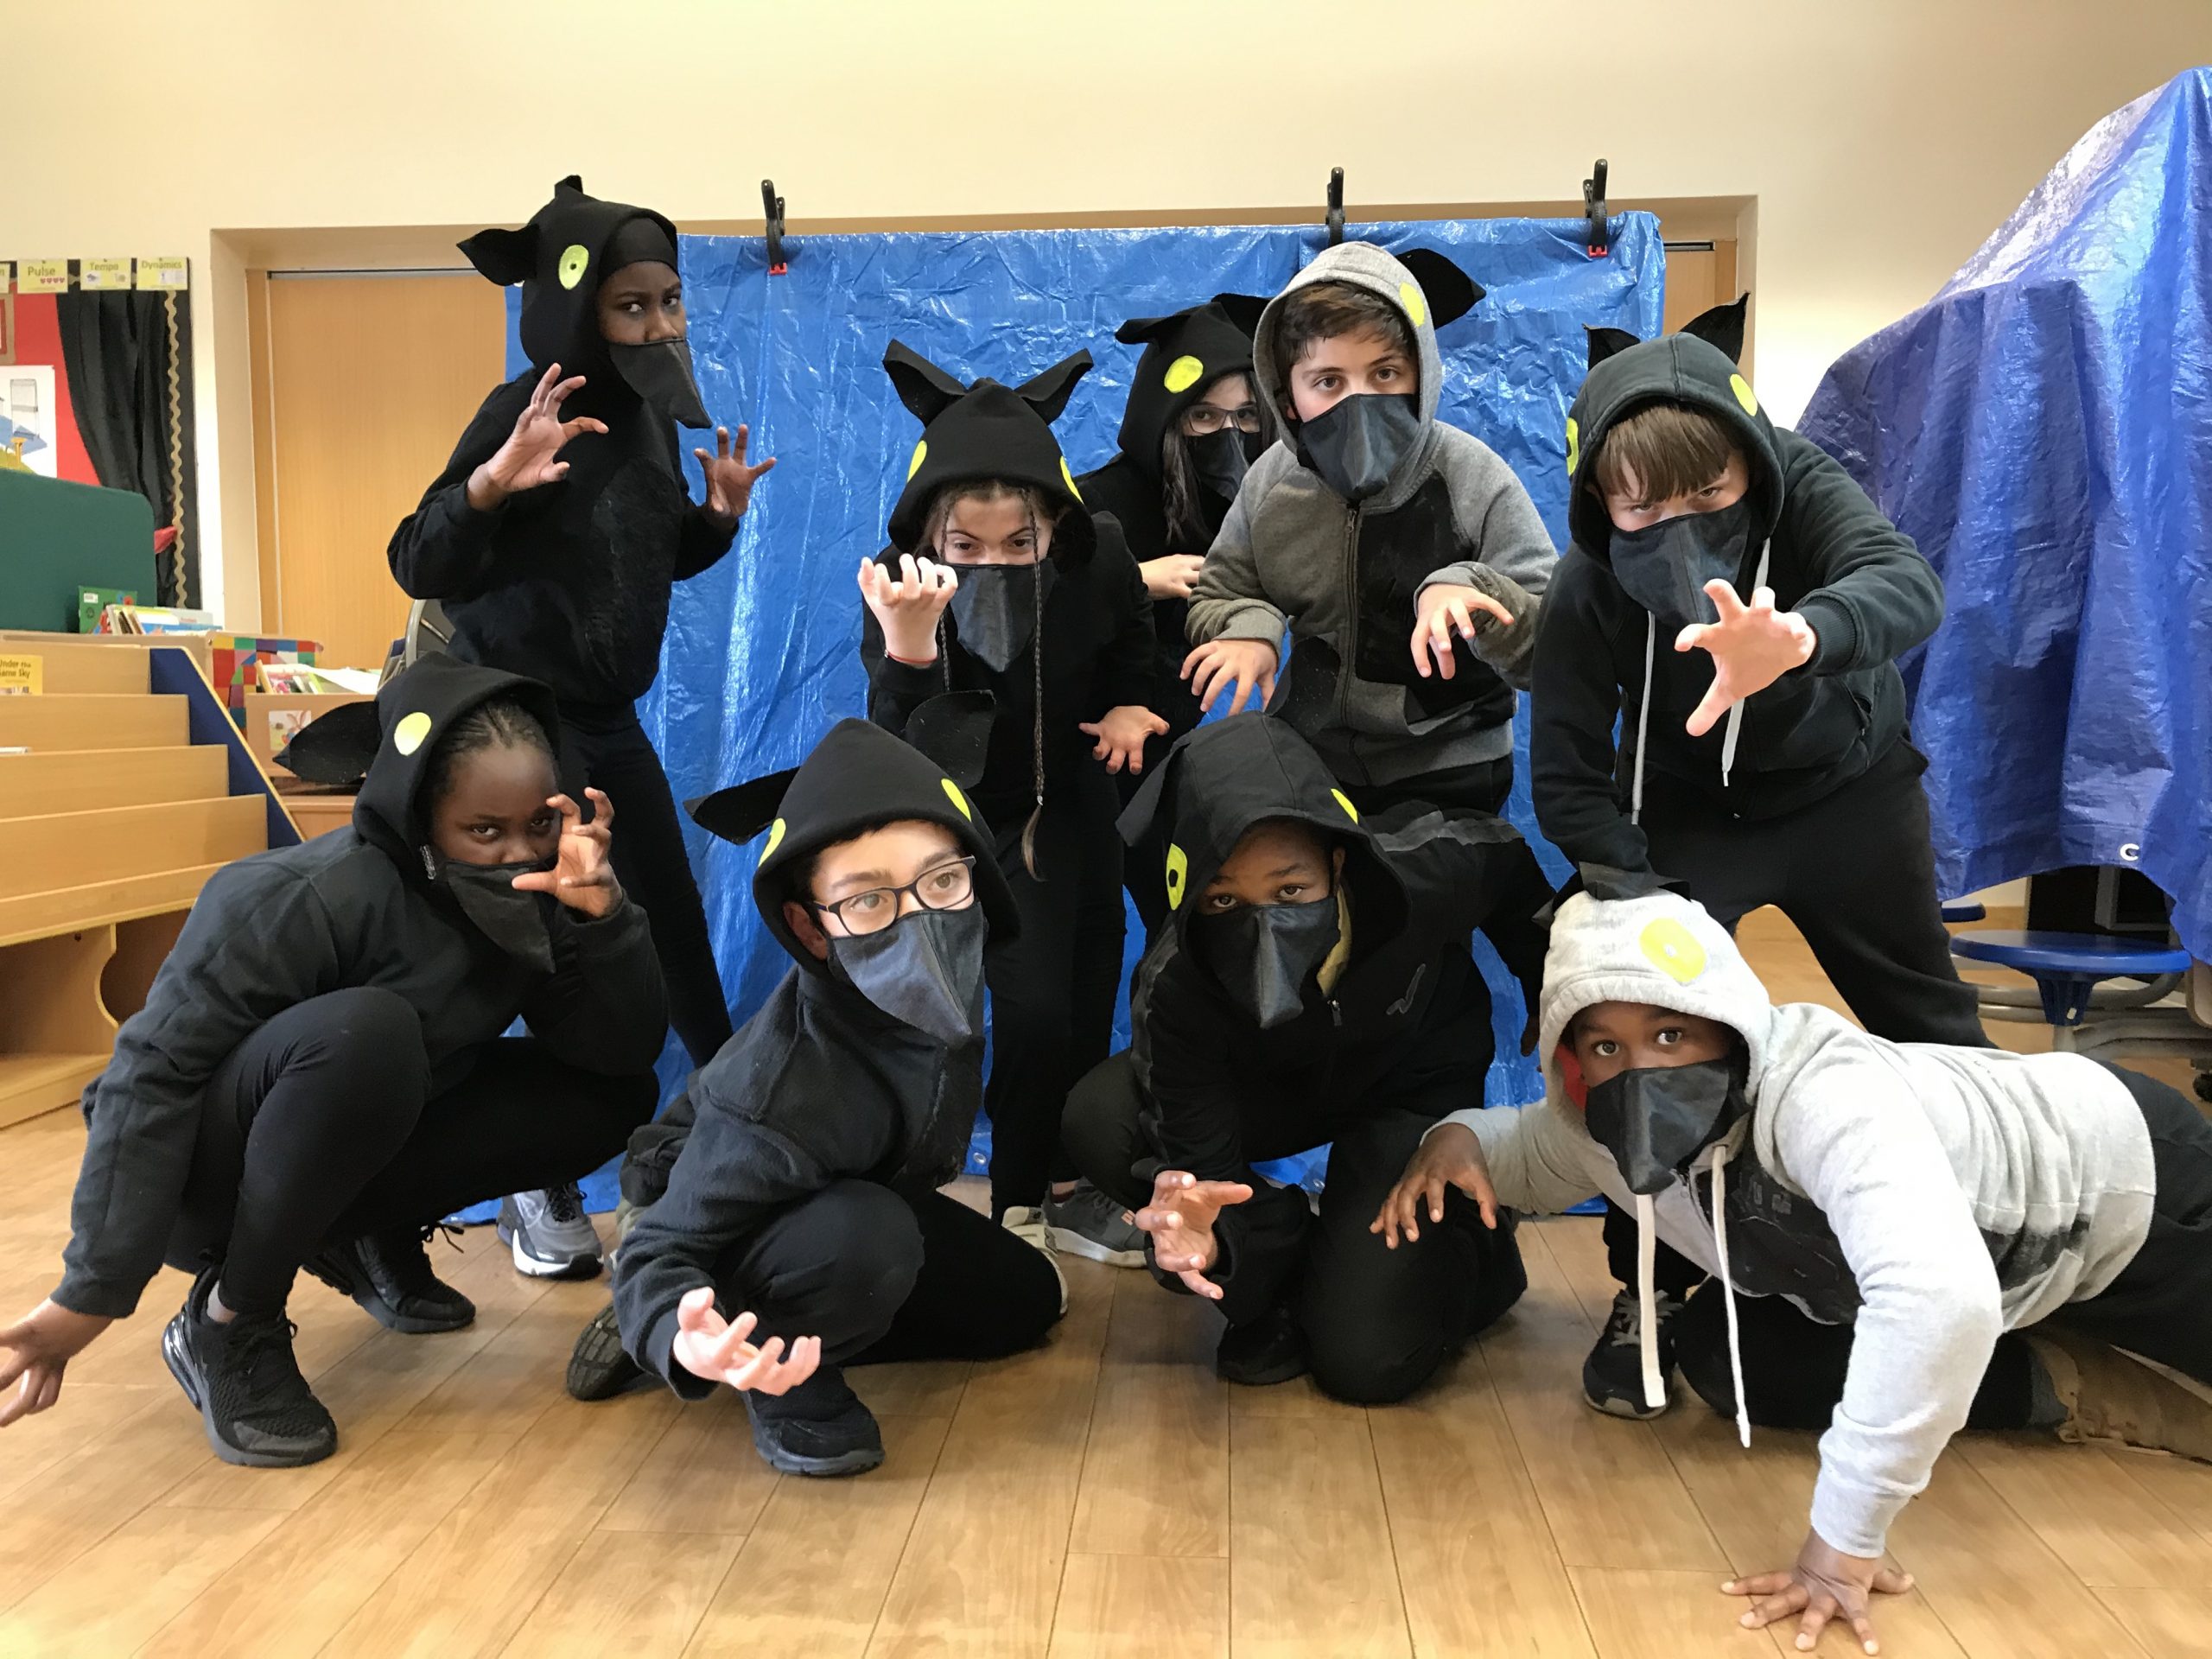 Group of school children in their wolf costumes with pointy ears and masks.